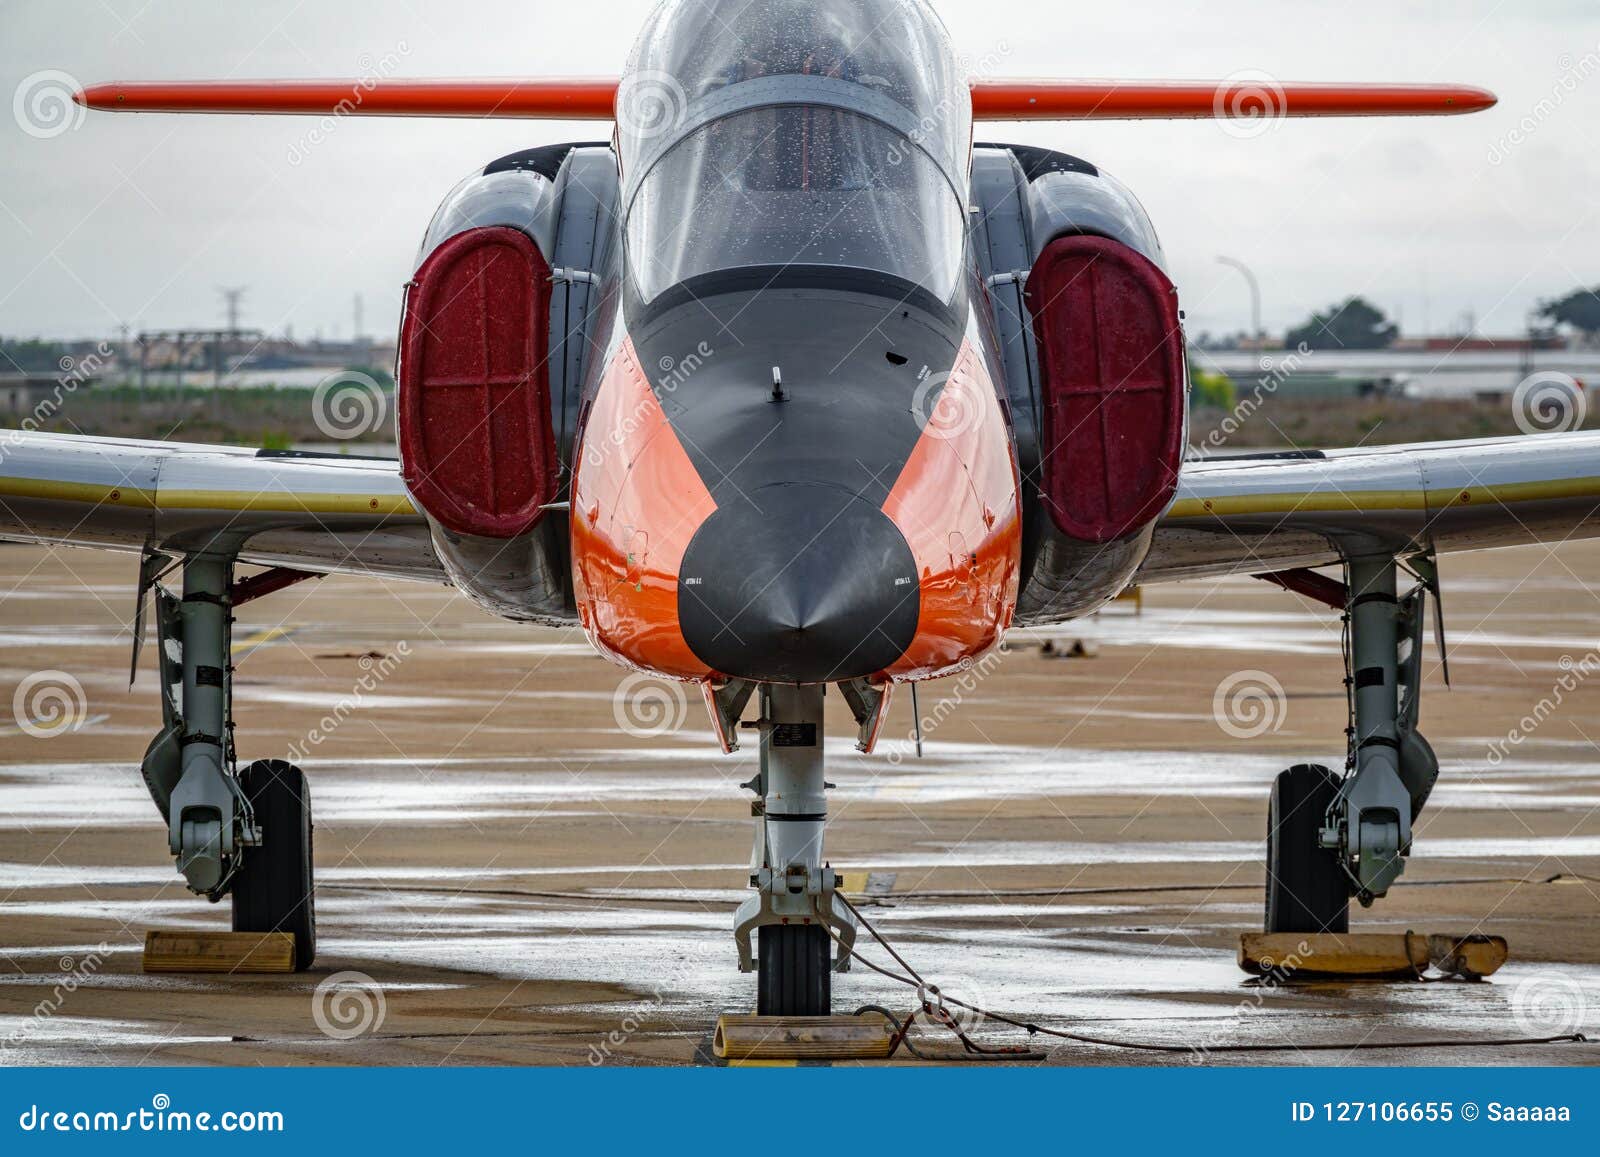 Advanced Jet Trainer Casa C 101 Aviojet Known As Eagle Patrol Front View Editorial Image Image Of Stormy Ends